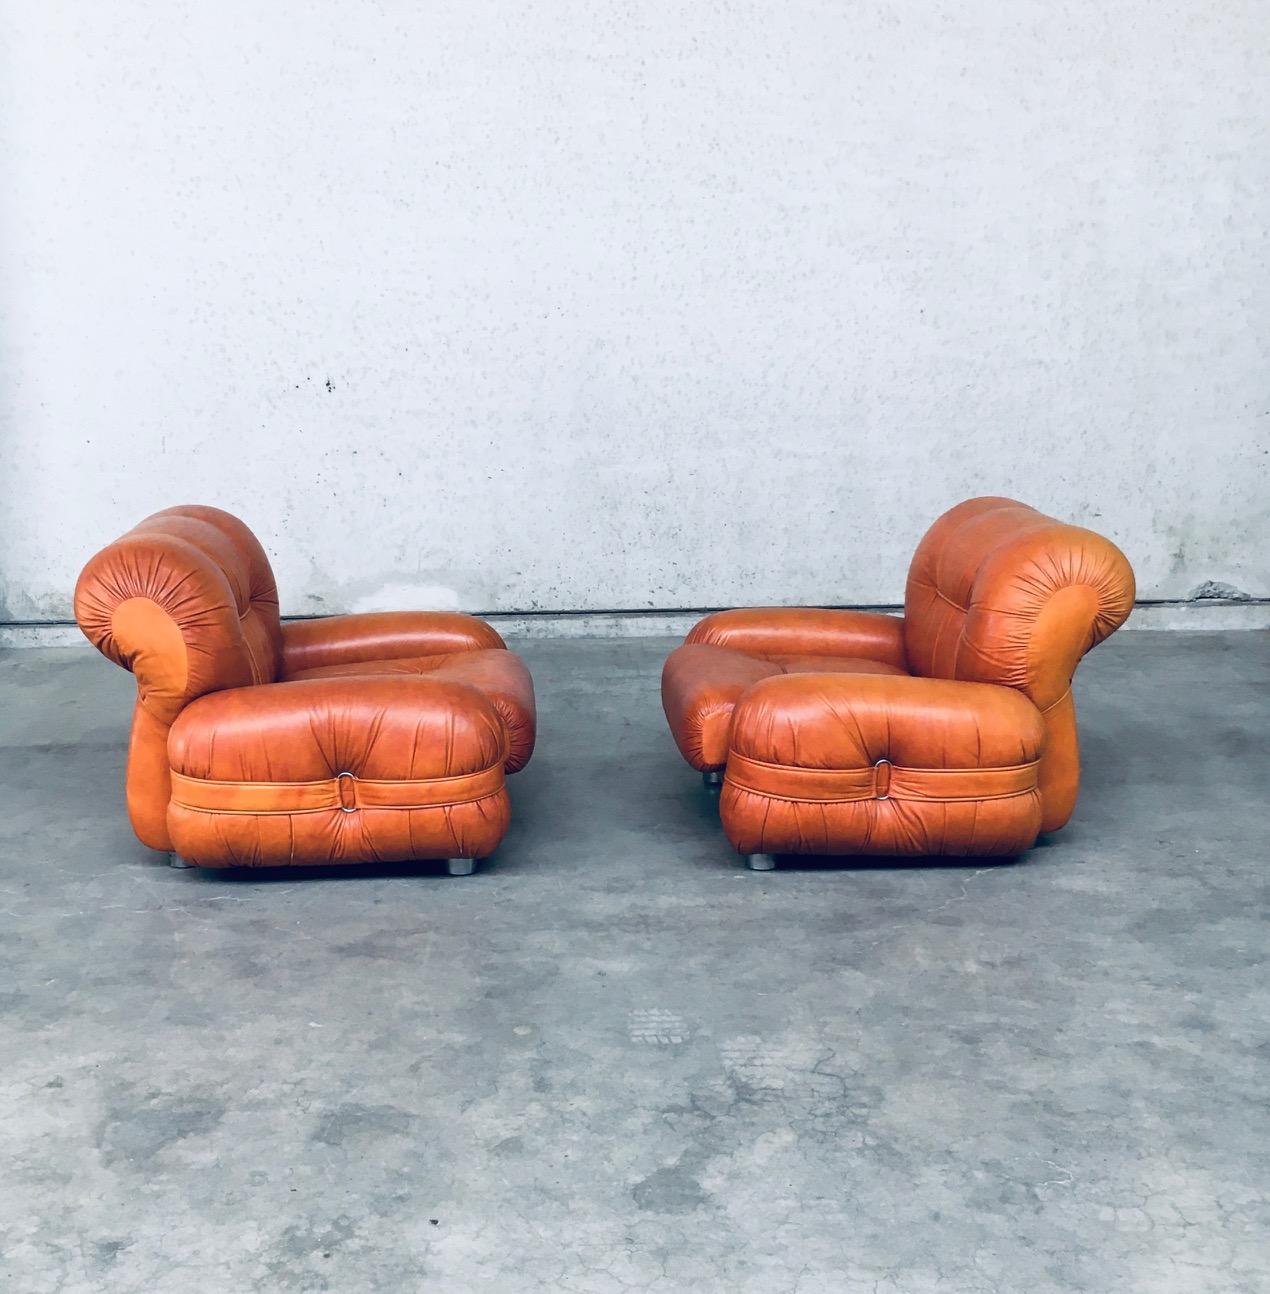 1970's Midcentury Modern Italian Design Leather Lounge Chair Set For Sale 2